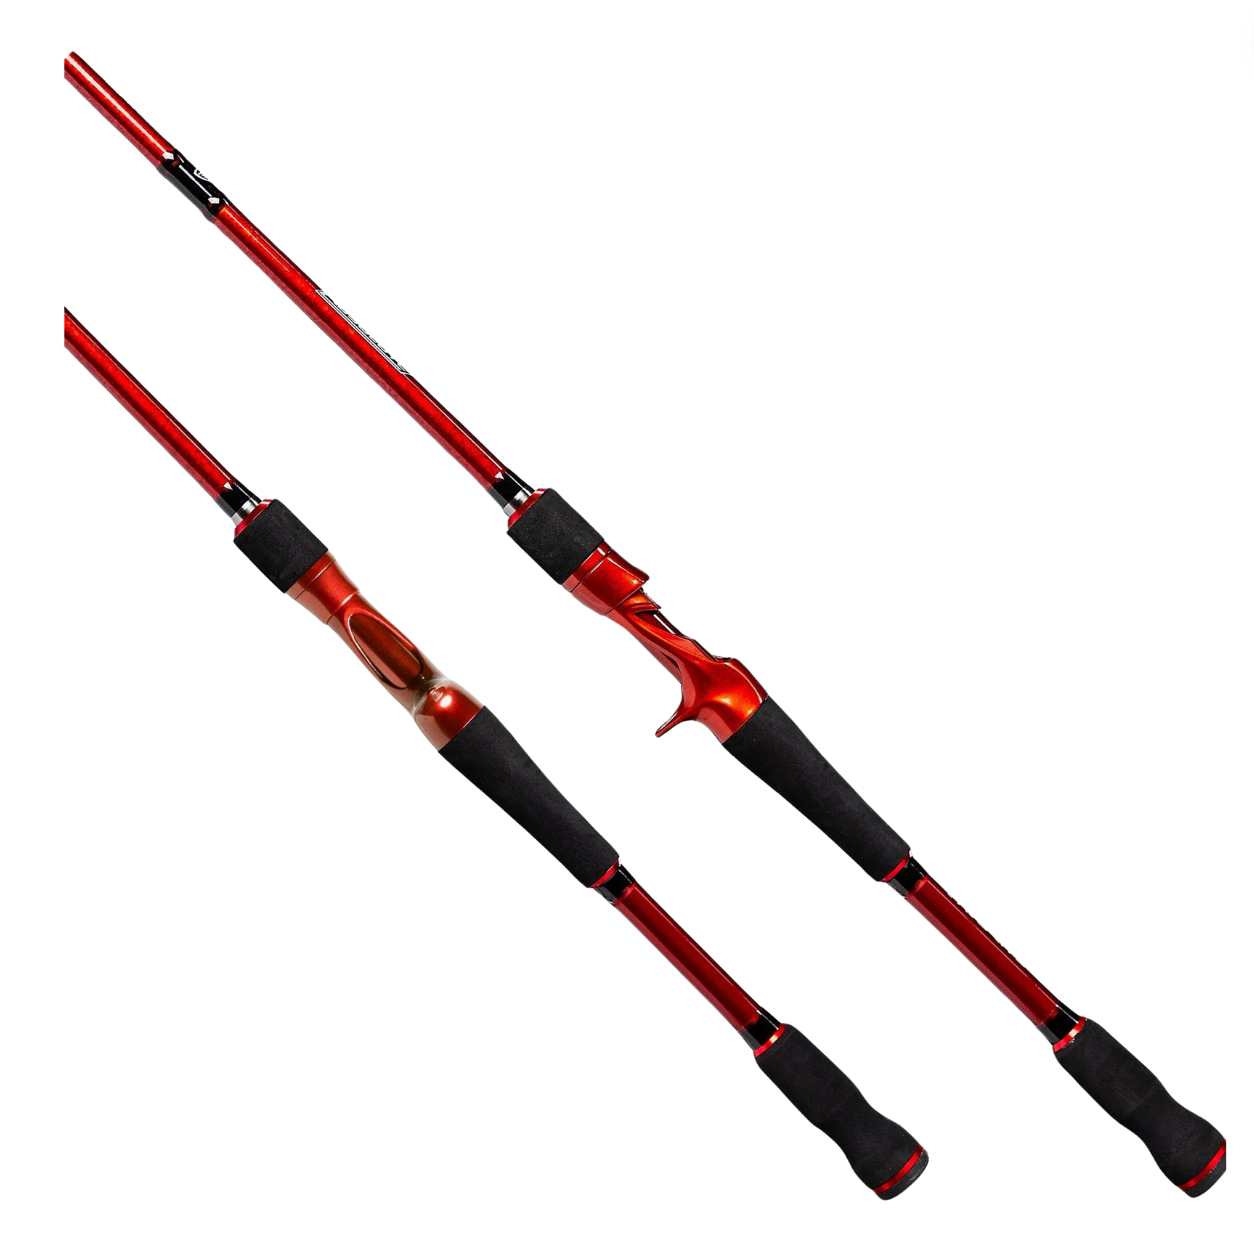 FAVORITE ABSOLUTE CASTING ROD 7'6"